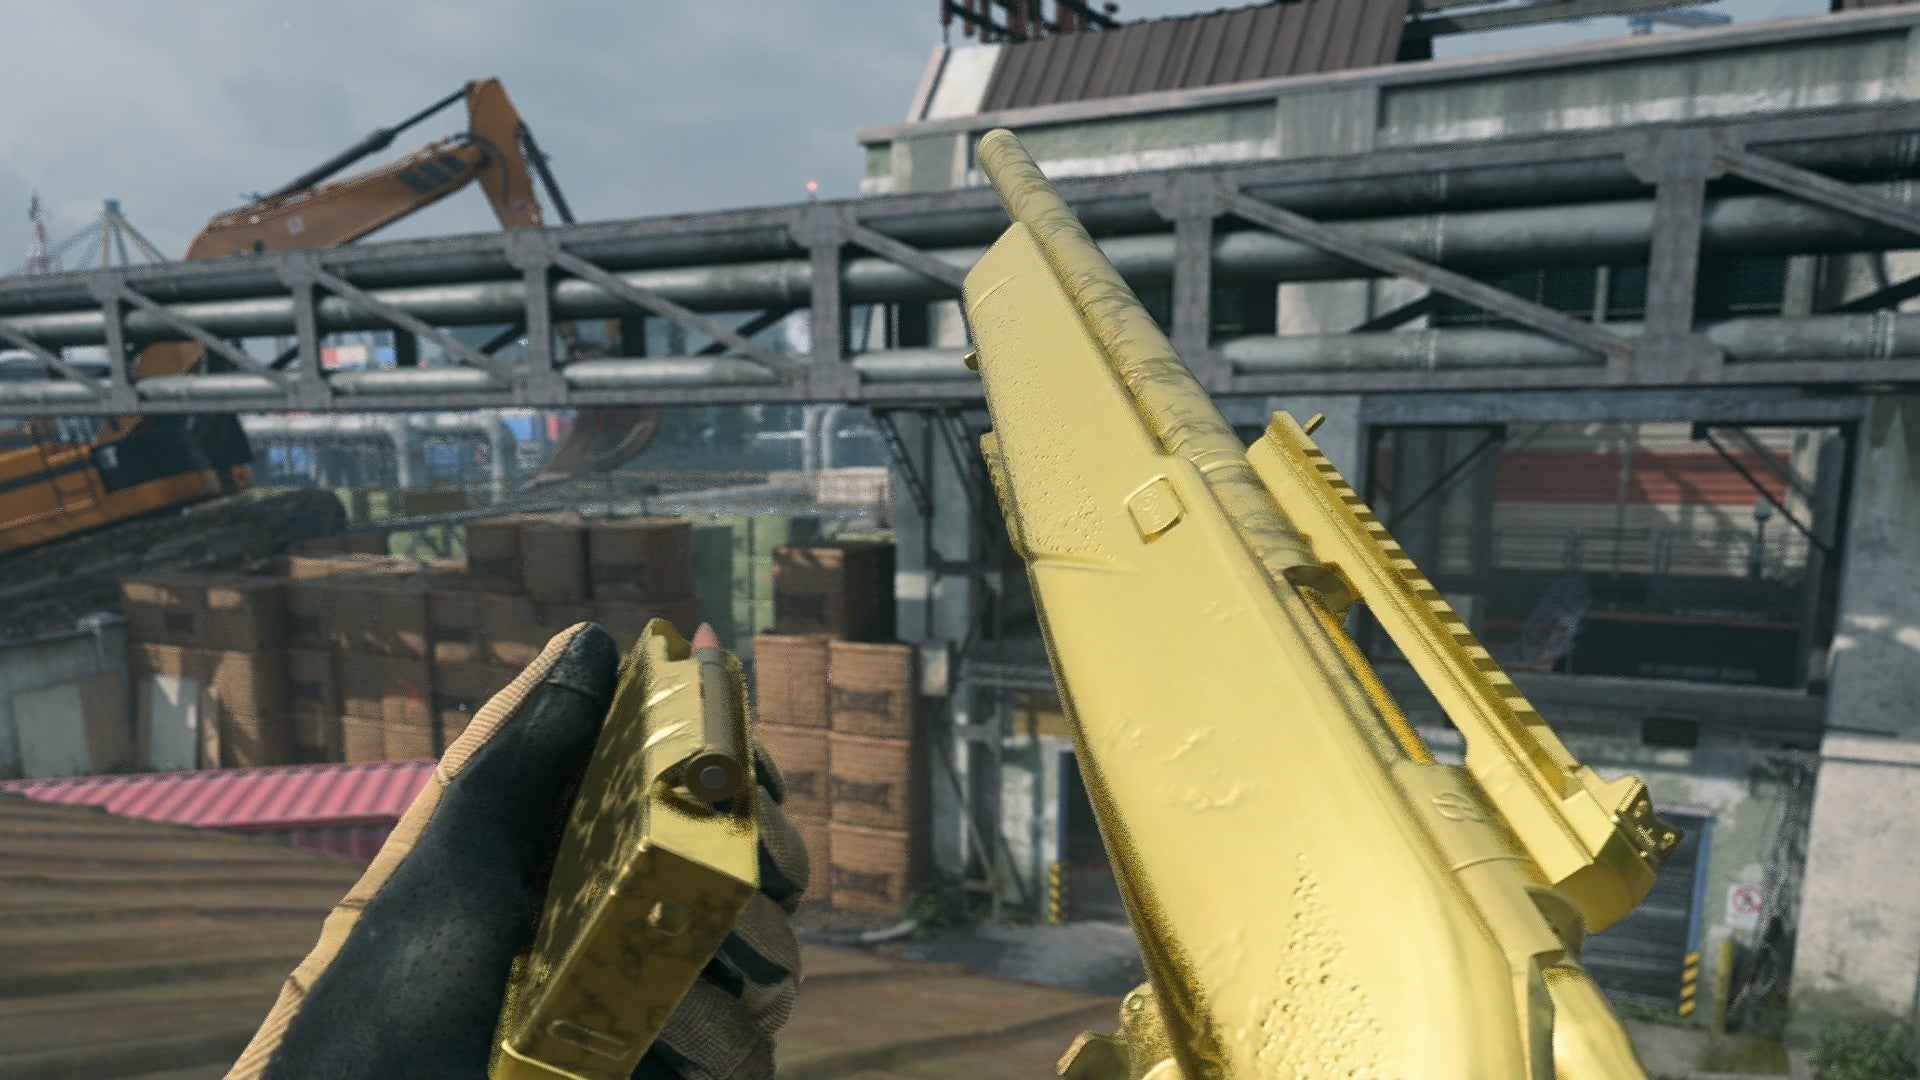 Warzone 2 screenshot showing the SP-R 208 with the gold camo, as a player stands on a rooftop overlooking a factory.